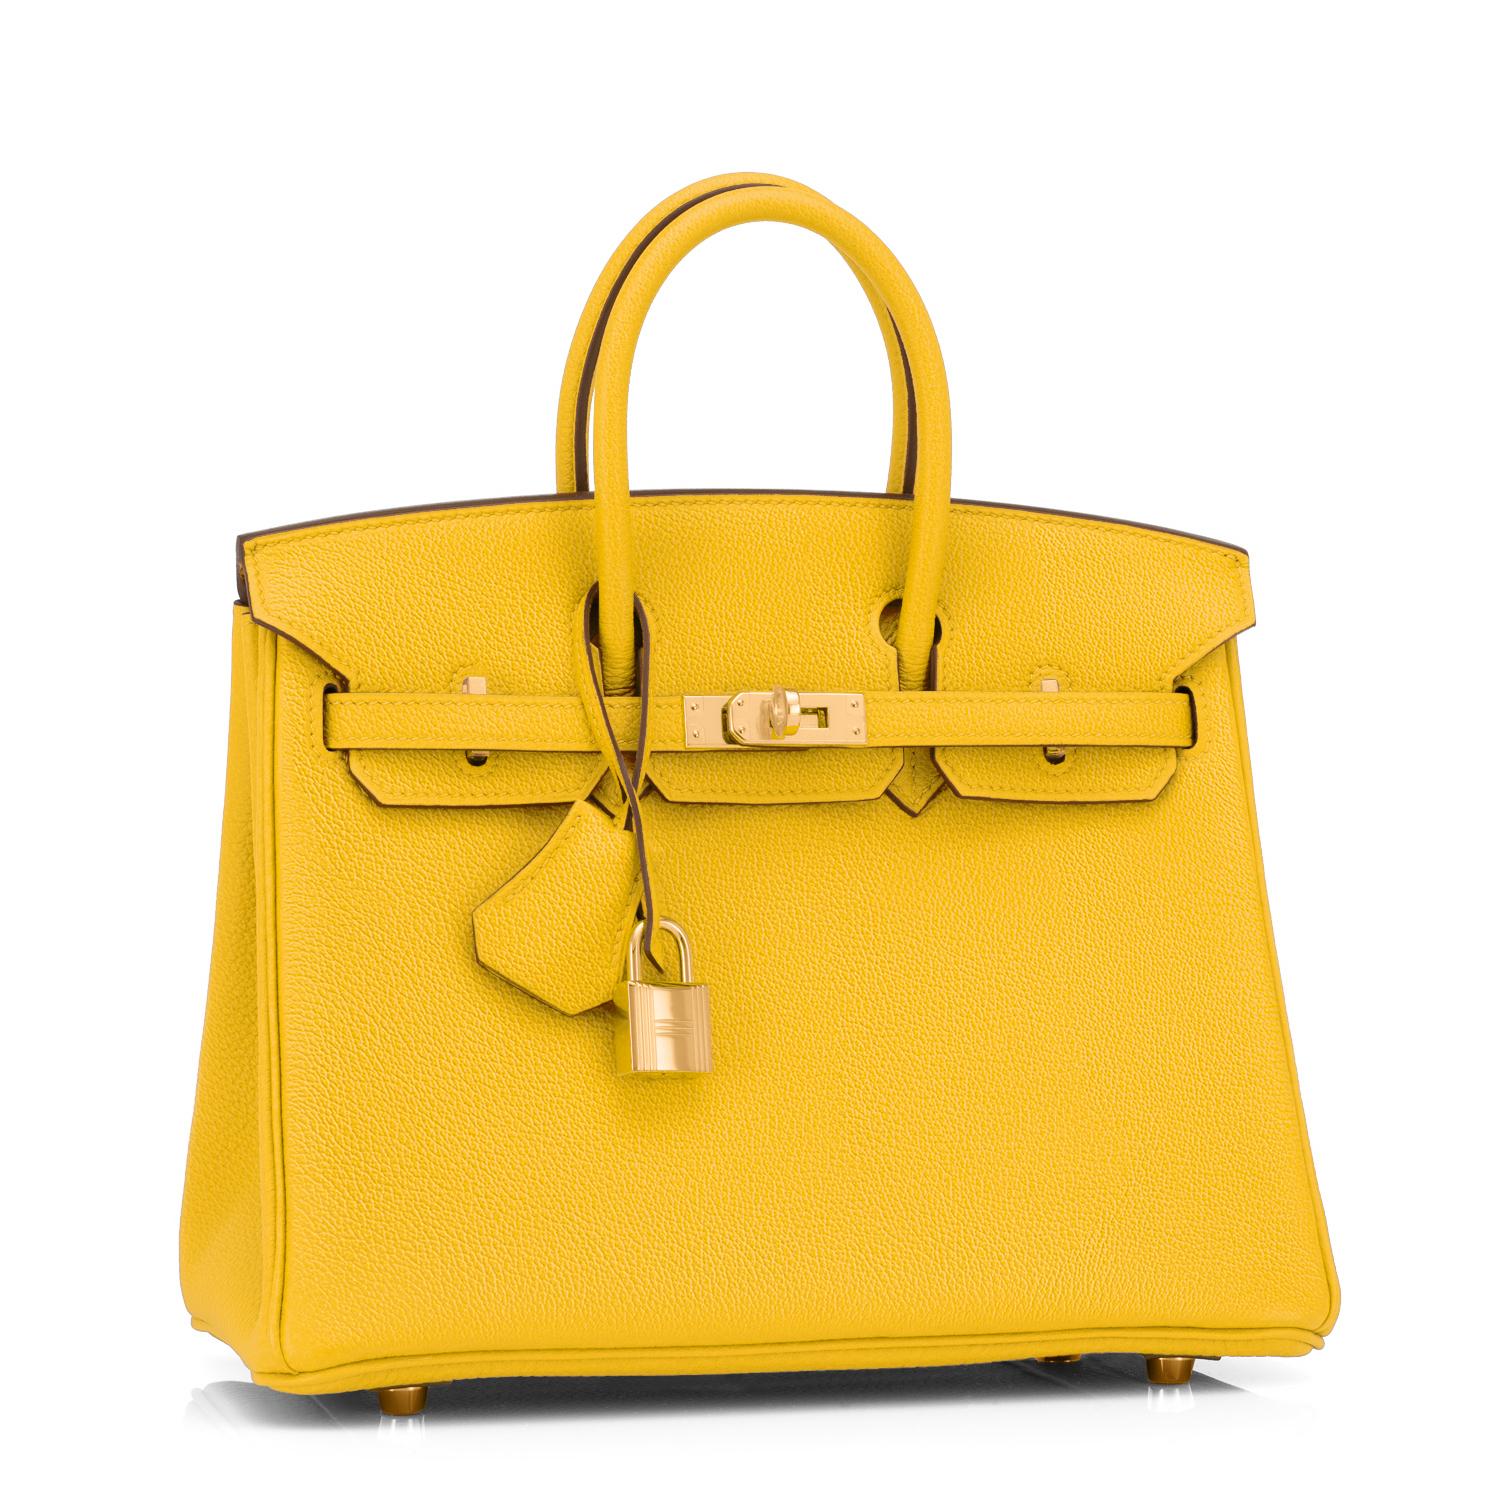 Hermes Birkin 25cm Jaune de Naples Gold Hardware Bag NEW
Brand New in Box. Store fresh. Pristine Condition (with plastic on hardware)
Perfect gift!  Comes with keys, lock, clochette, a sleeper for the bag, rain protector, and Hermes box.  
Jaune de